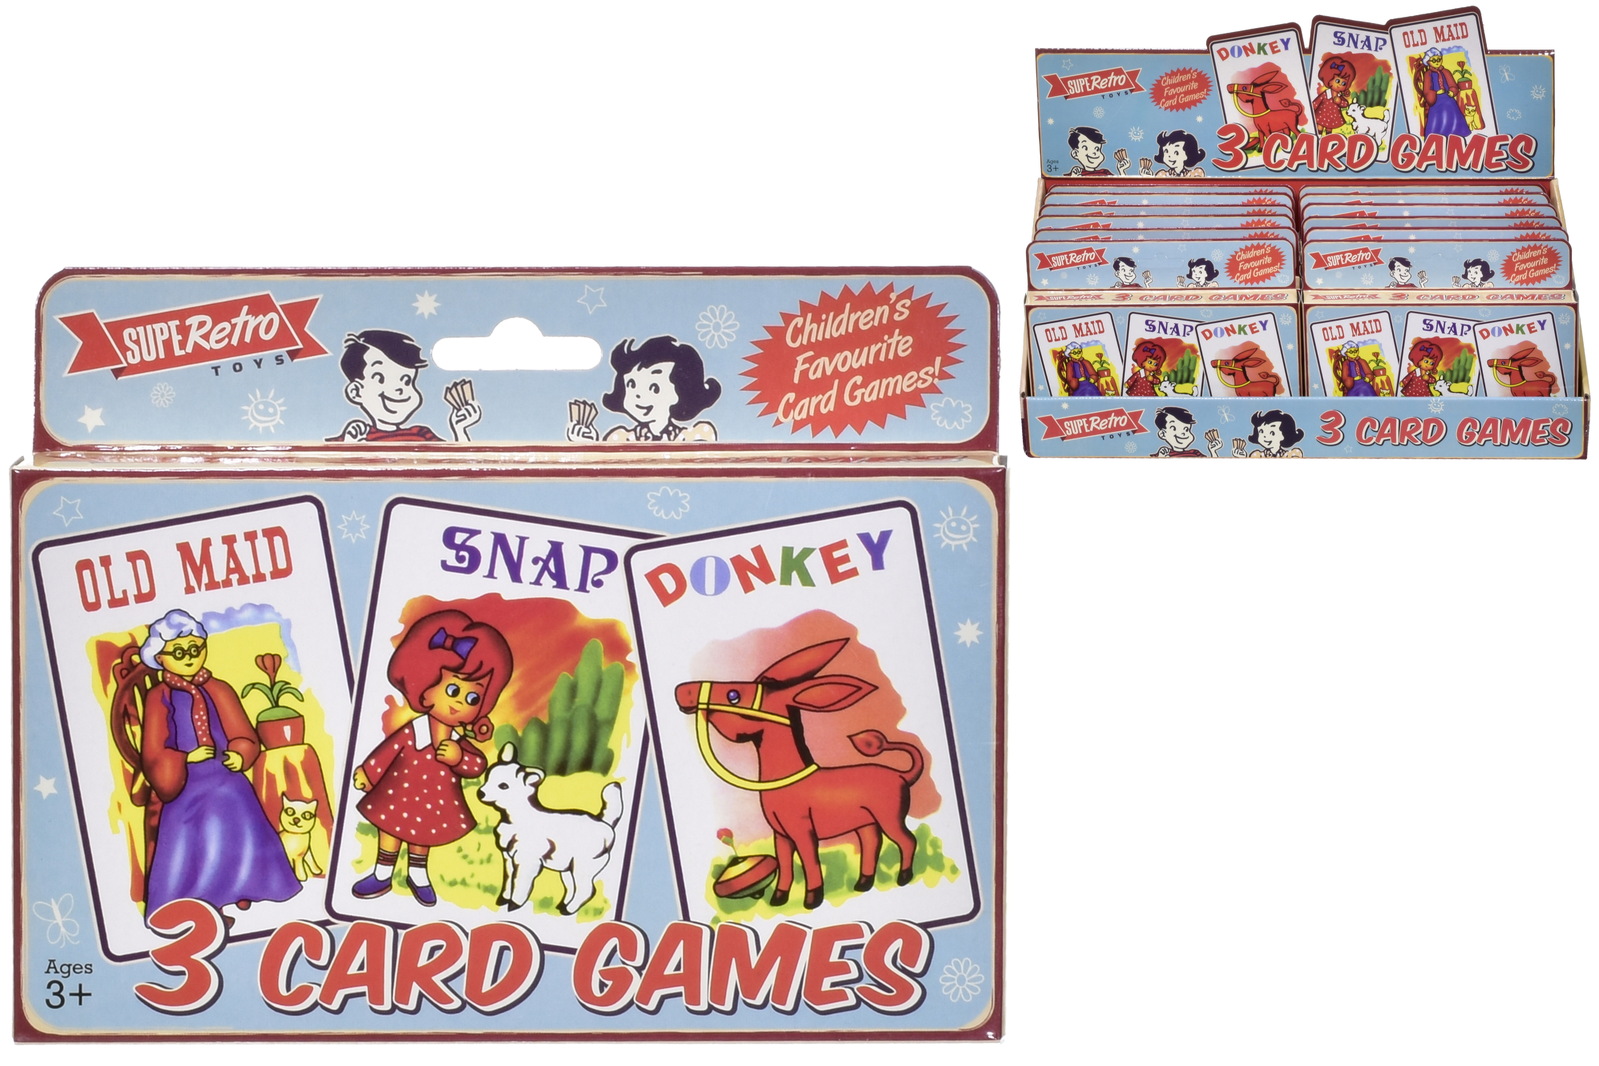 Set of 4 Packs of Children's Playing Cards Old Maid Animal Snap+Snap+Donkey 